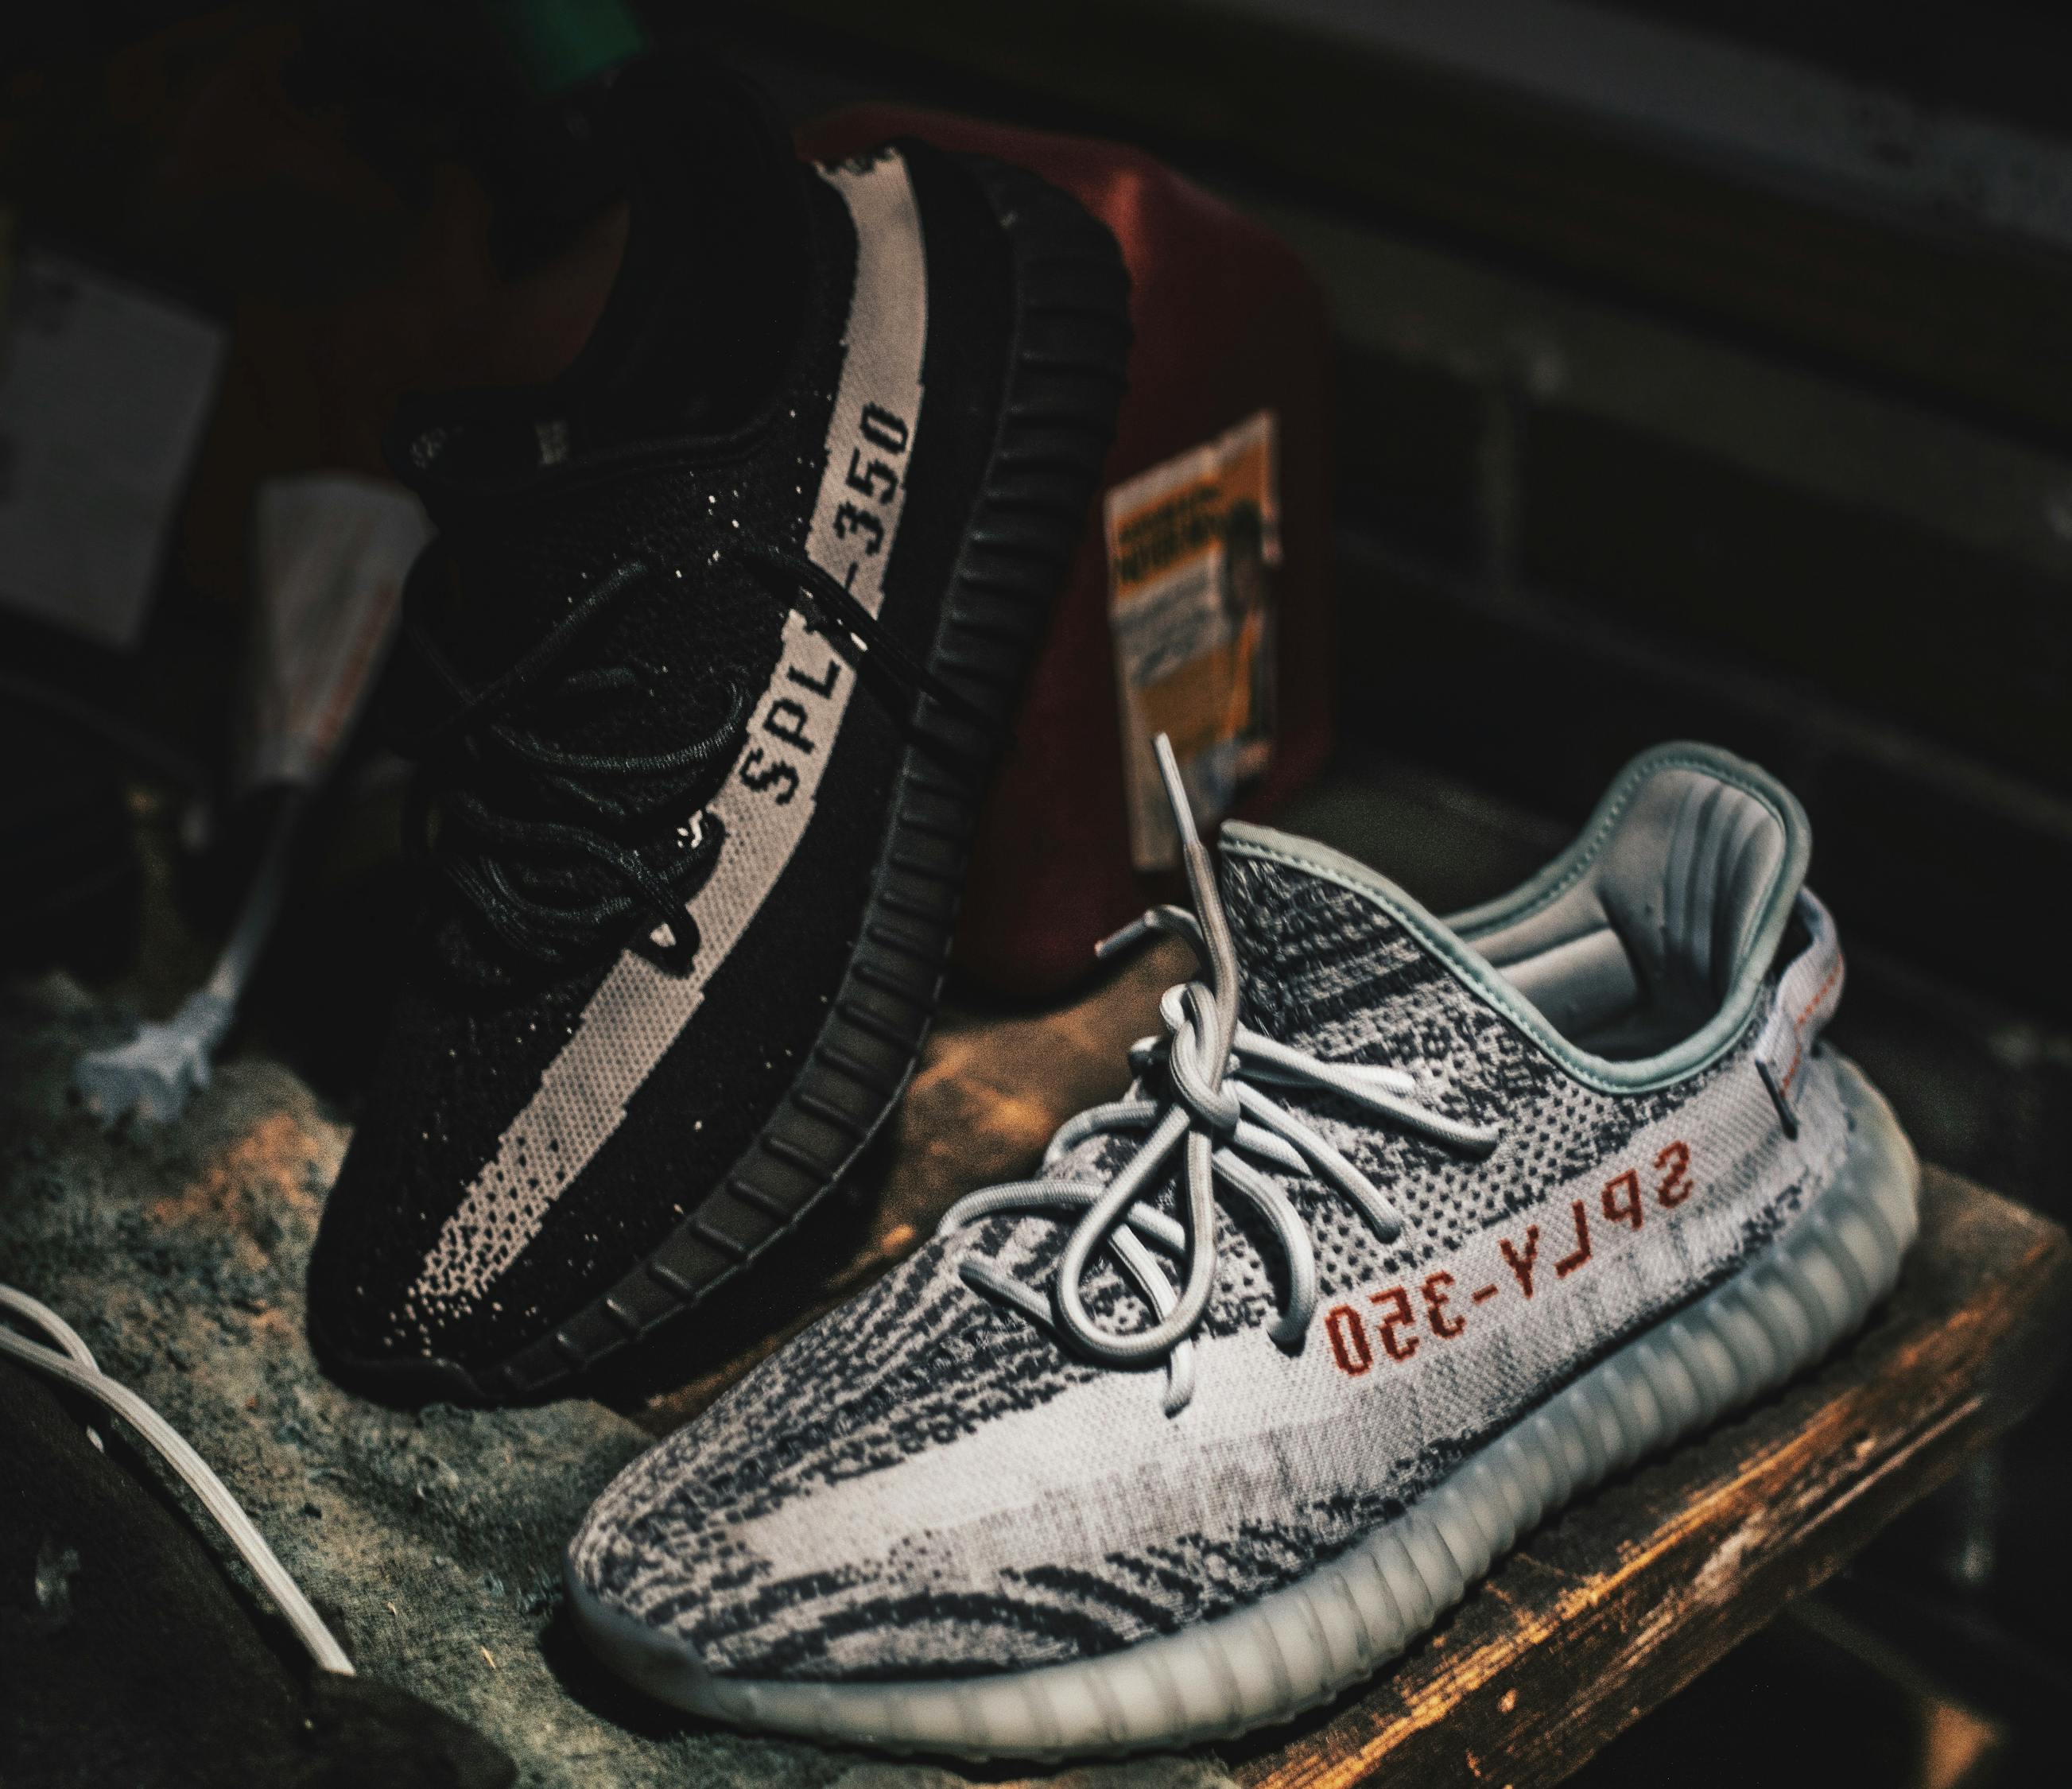 Two Unpaired Black and Gray Adidas Sply-350 V2 · Free Stock Photo